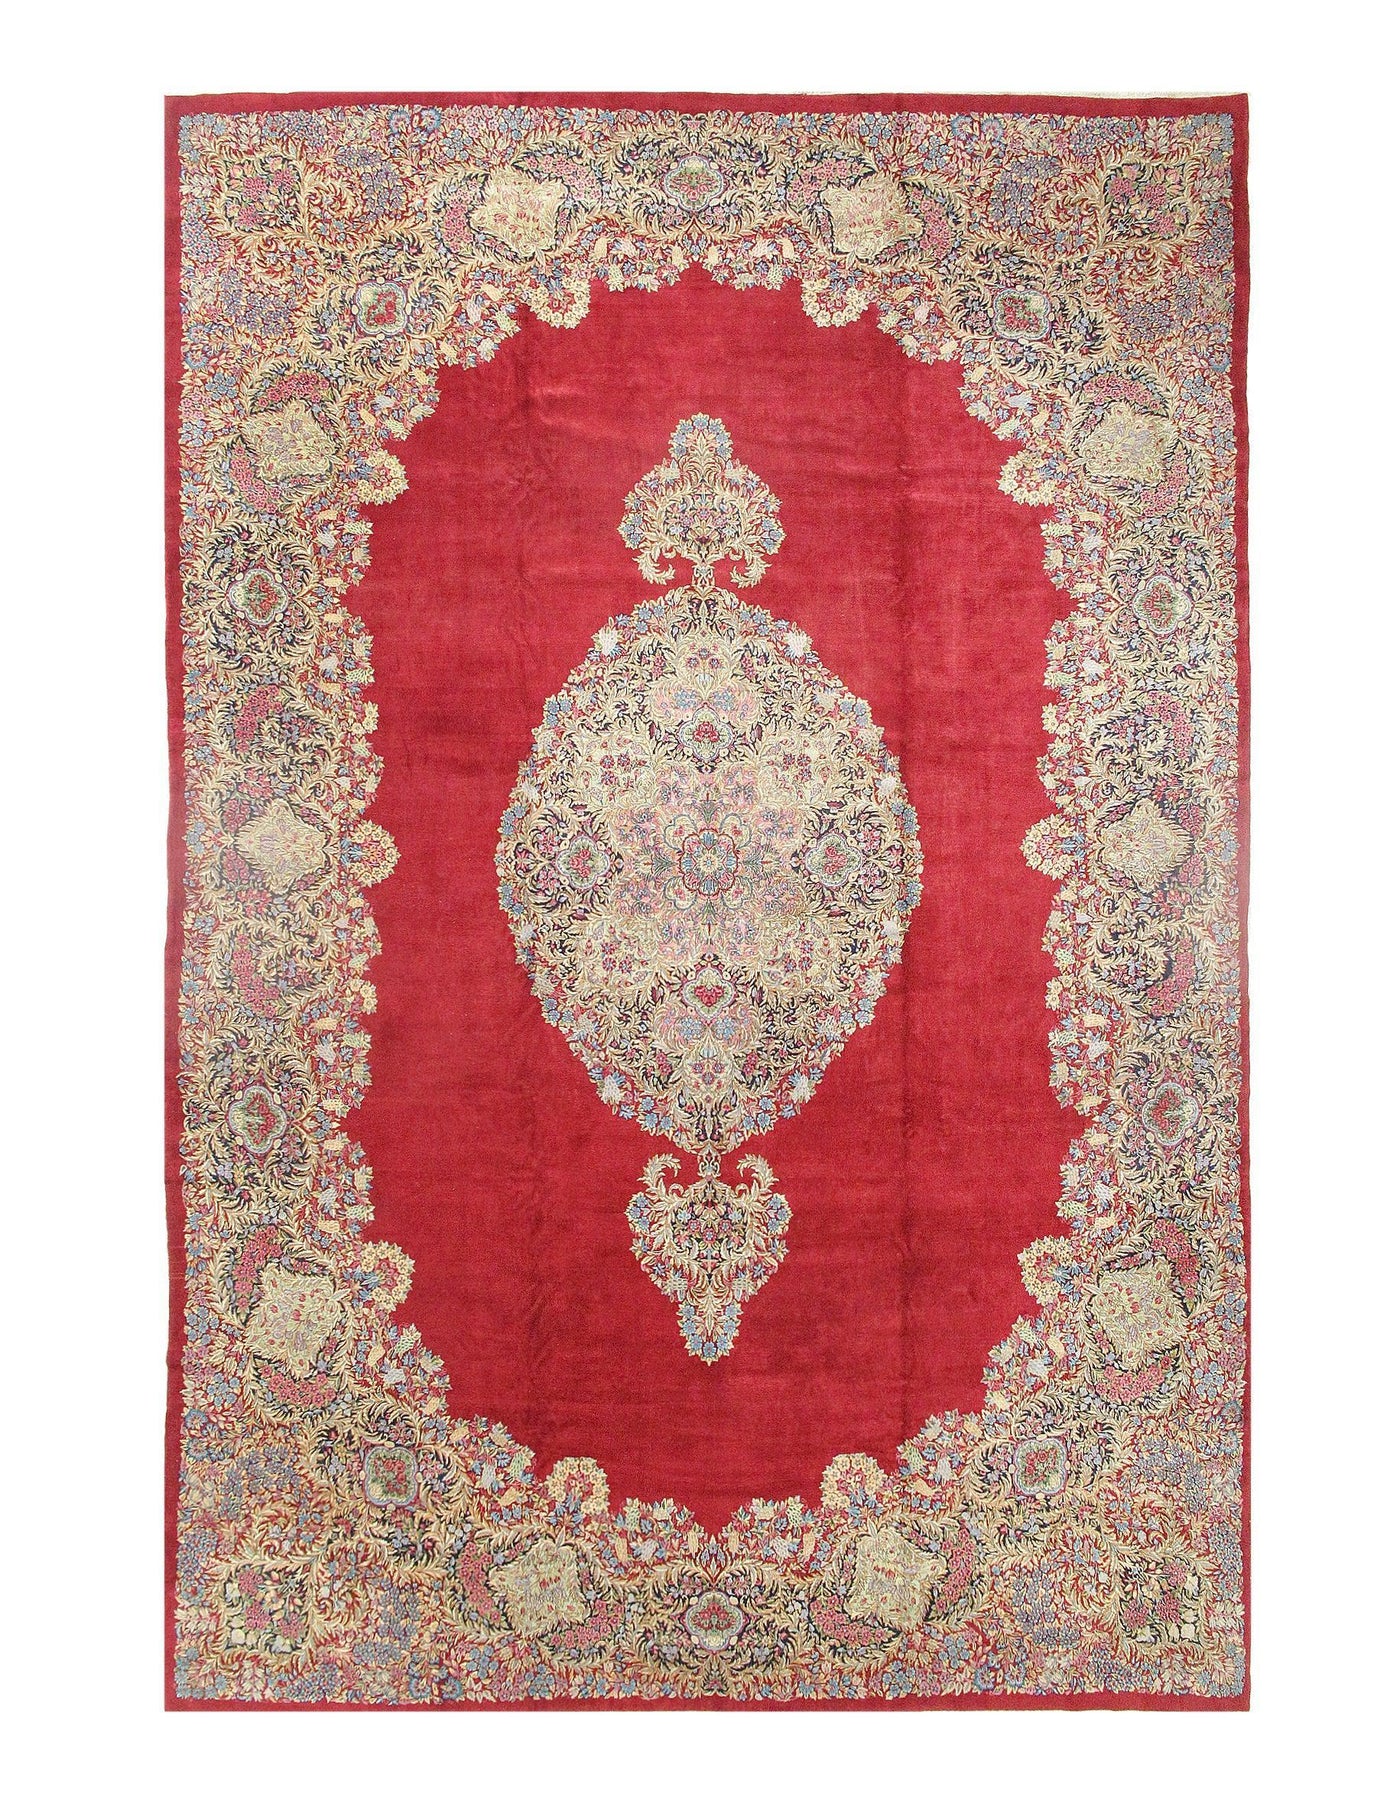 Canvello Red Persian Antique Kerman Rug - 13' X 19'8''